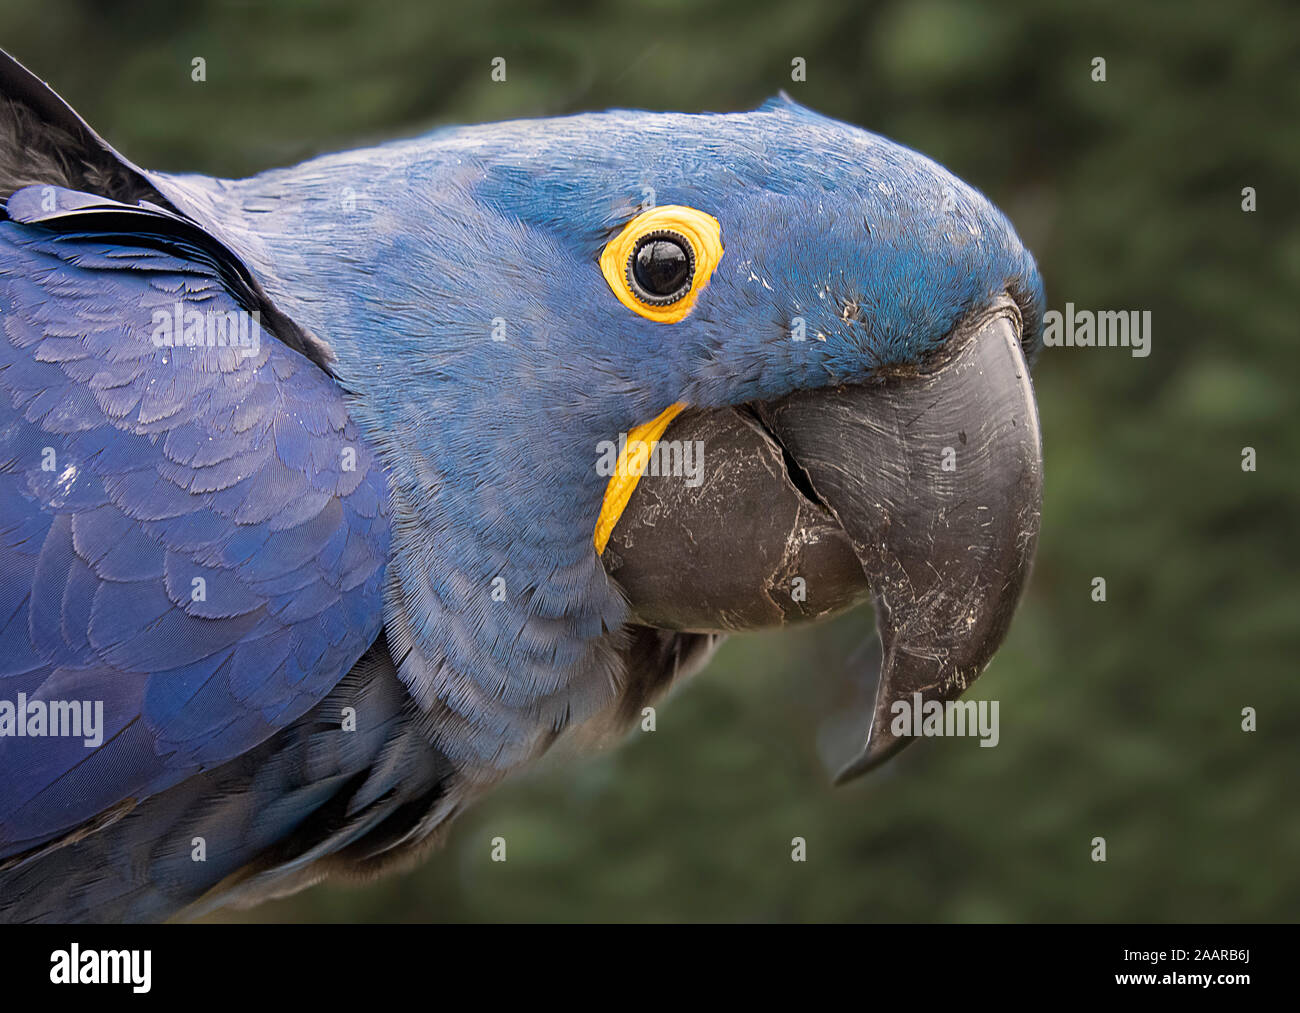 A very close portrait of the head of a hyacinth macaw, or hyacinthine macaw, a parrot native to central and eastern South America. Stock Photo